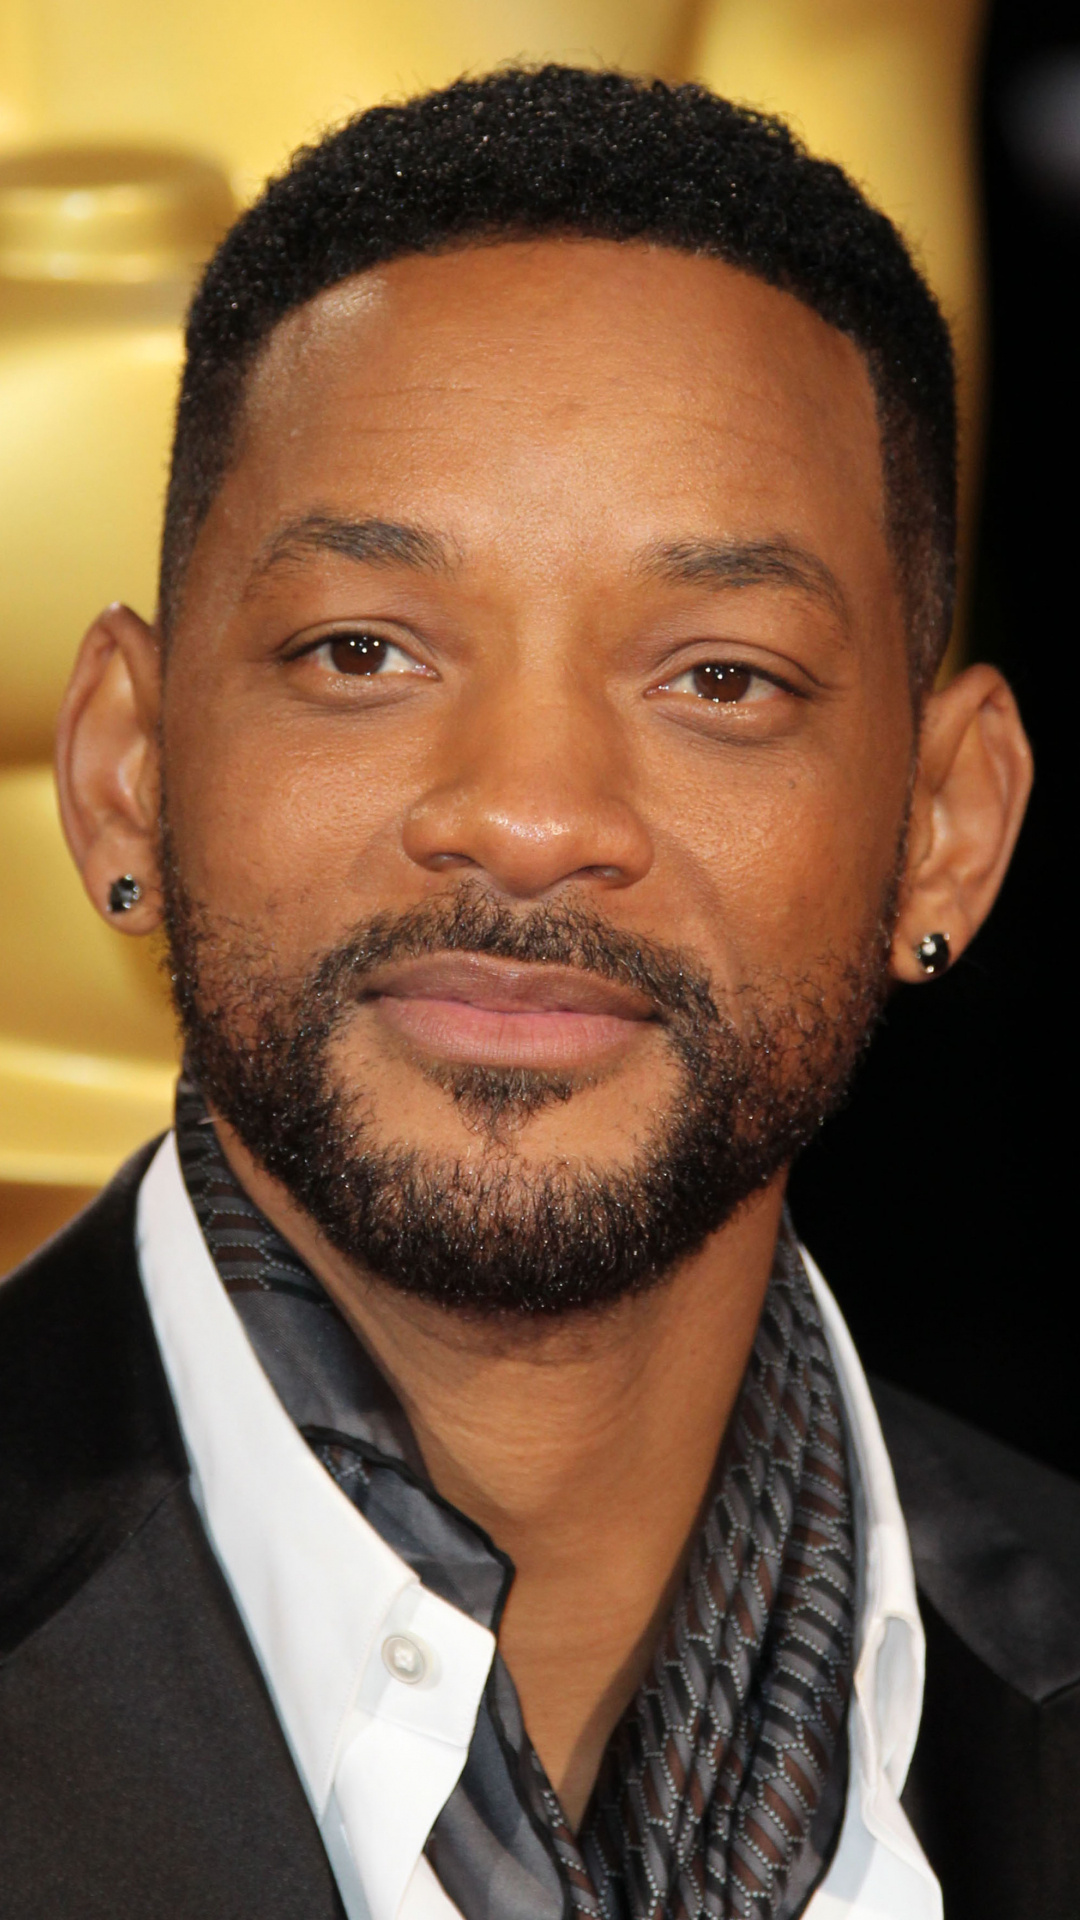 Will Smith: Starred alongside Tommy Lee Jones in the hit Men in Black, playing Agent J. 1080x1920 Full HD Background.